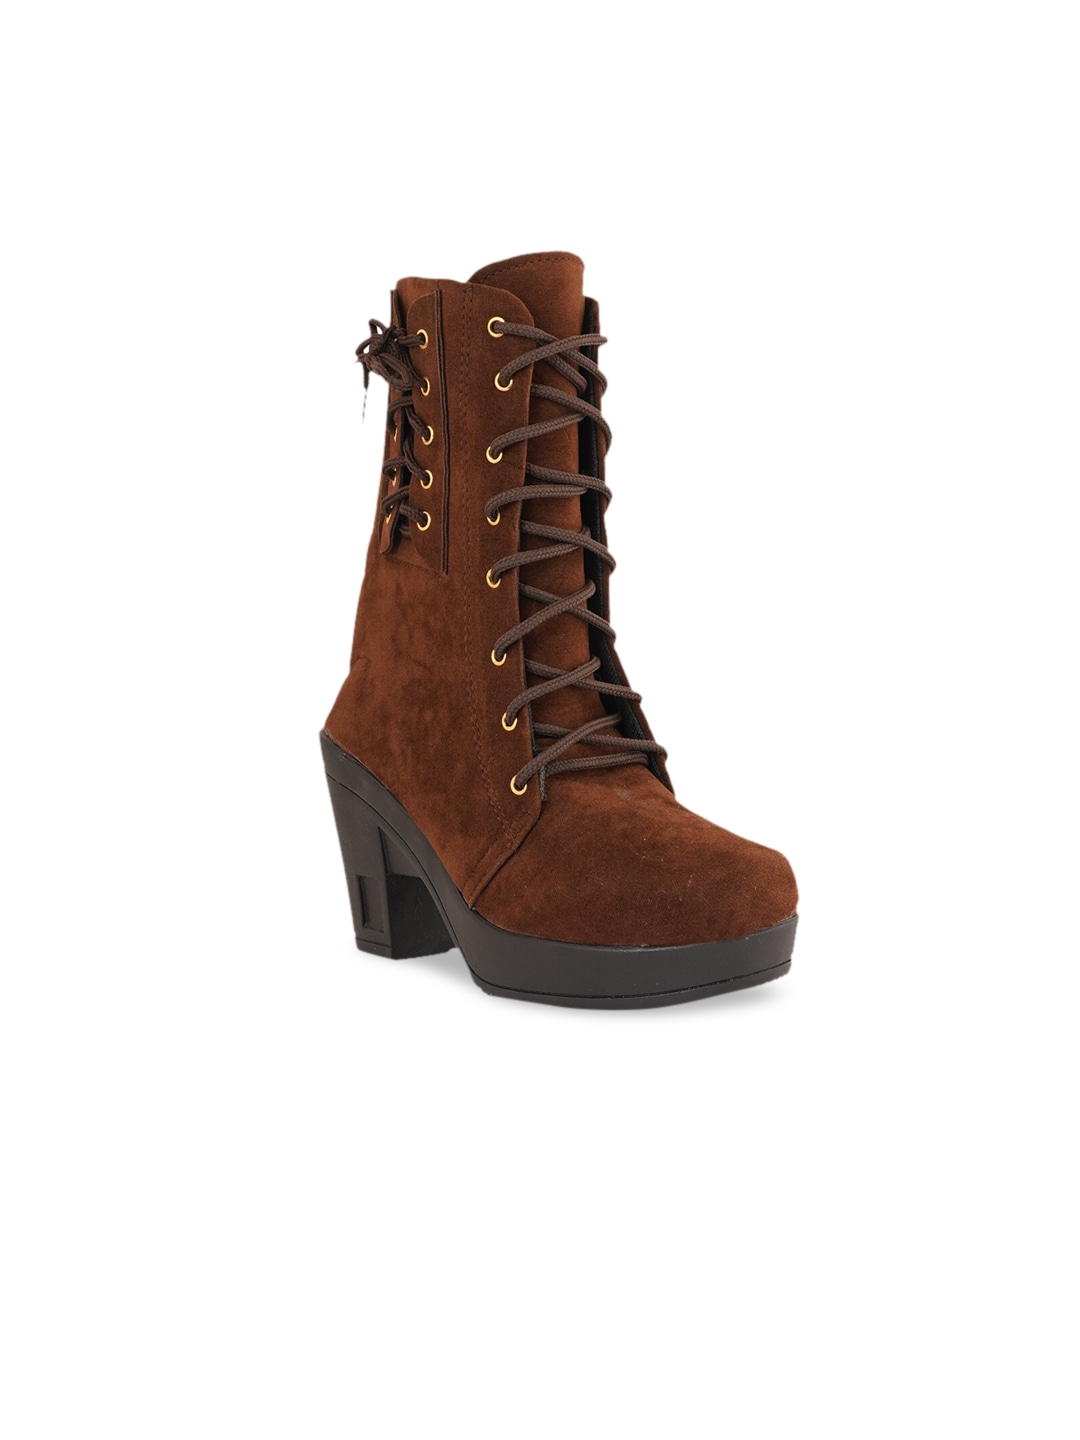 Walkfree Brown Suede High-Top Block Heeled Boots Price in India